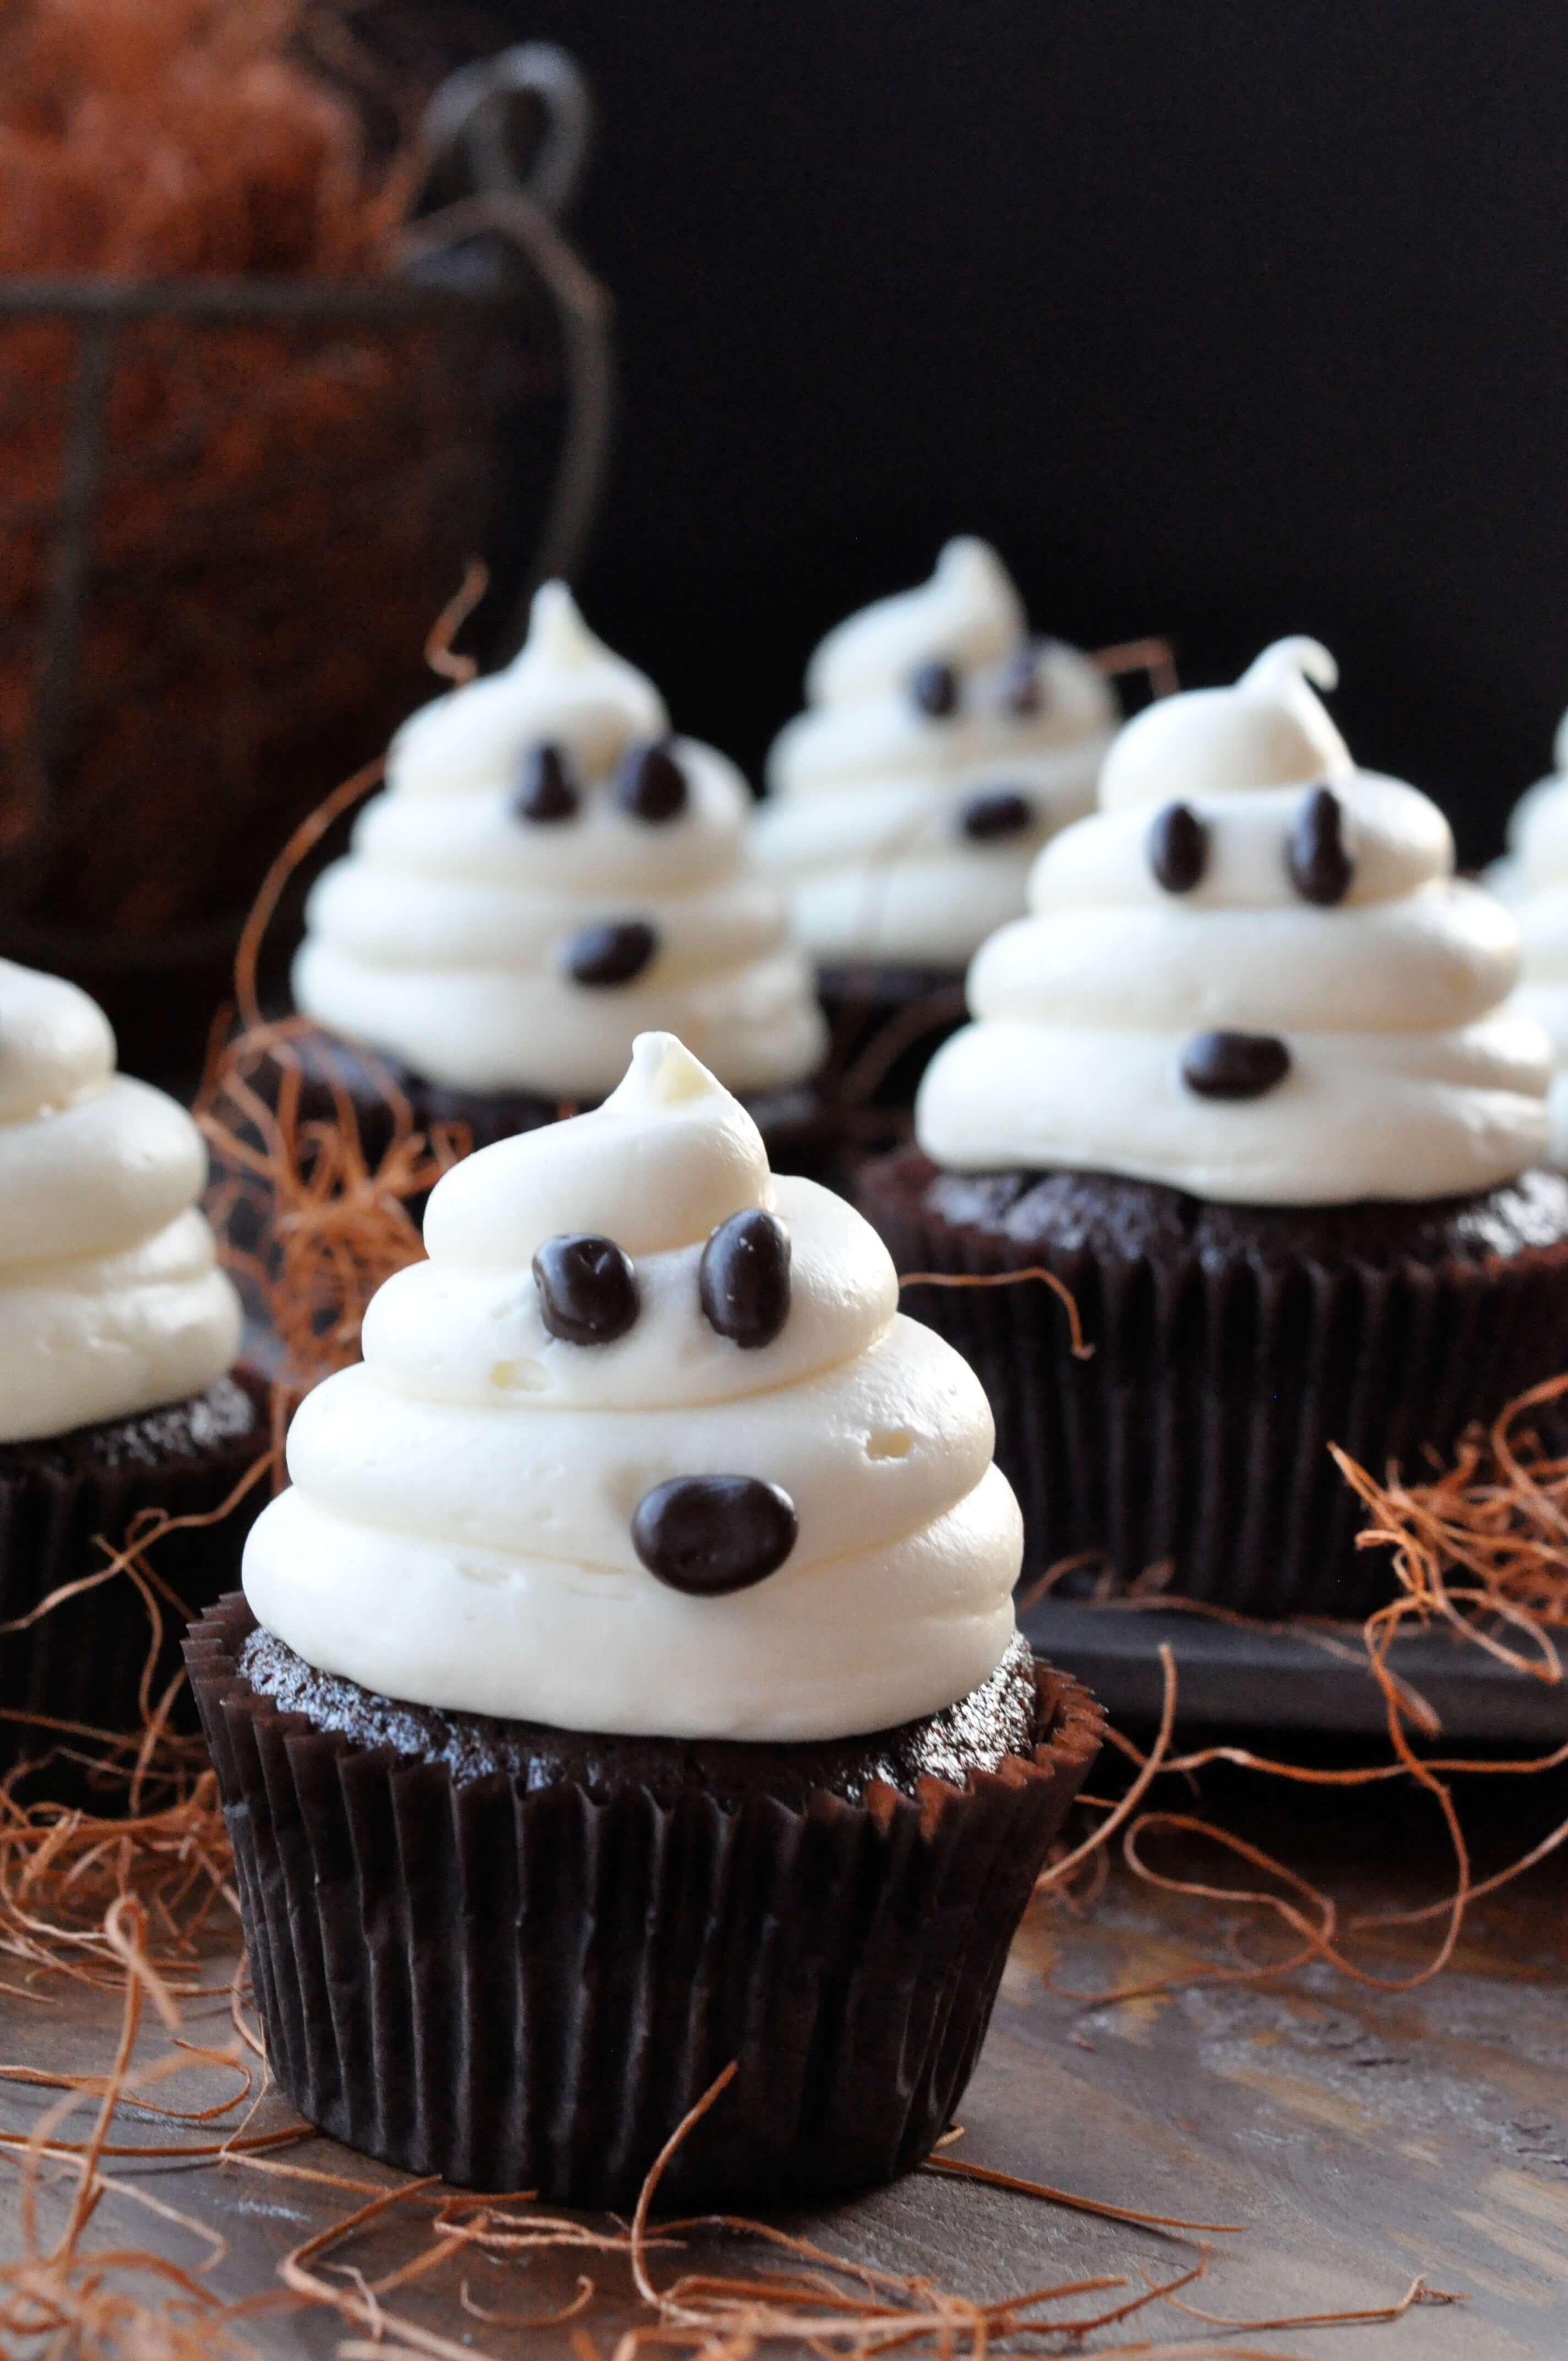 Homemade Halloween Cupcakes
 Halloween Ghosts on Carrot Cake Recipe—Fast and Easy